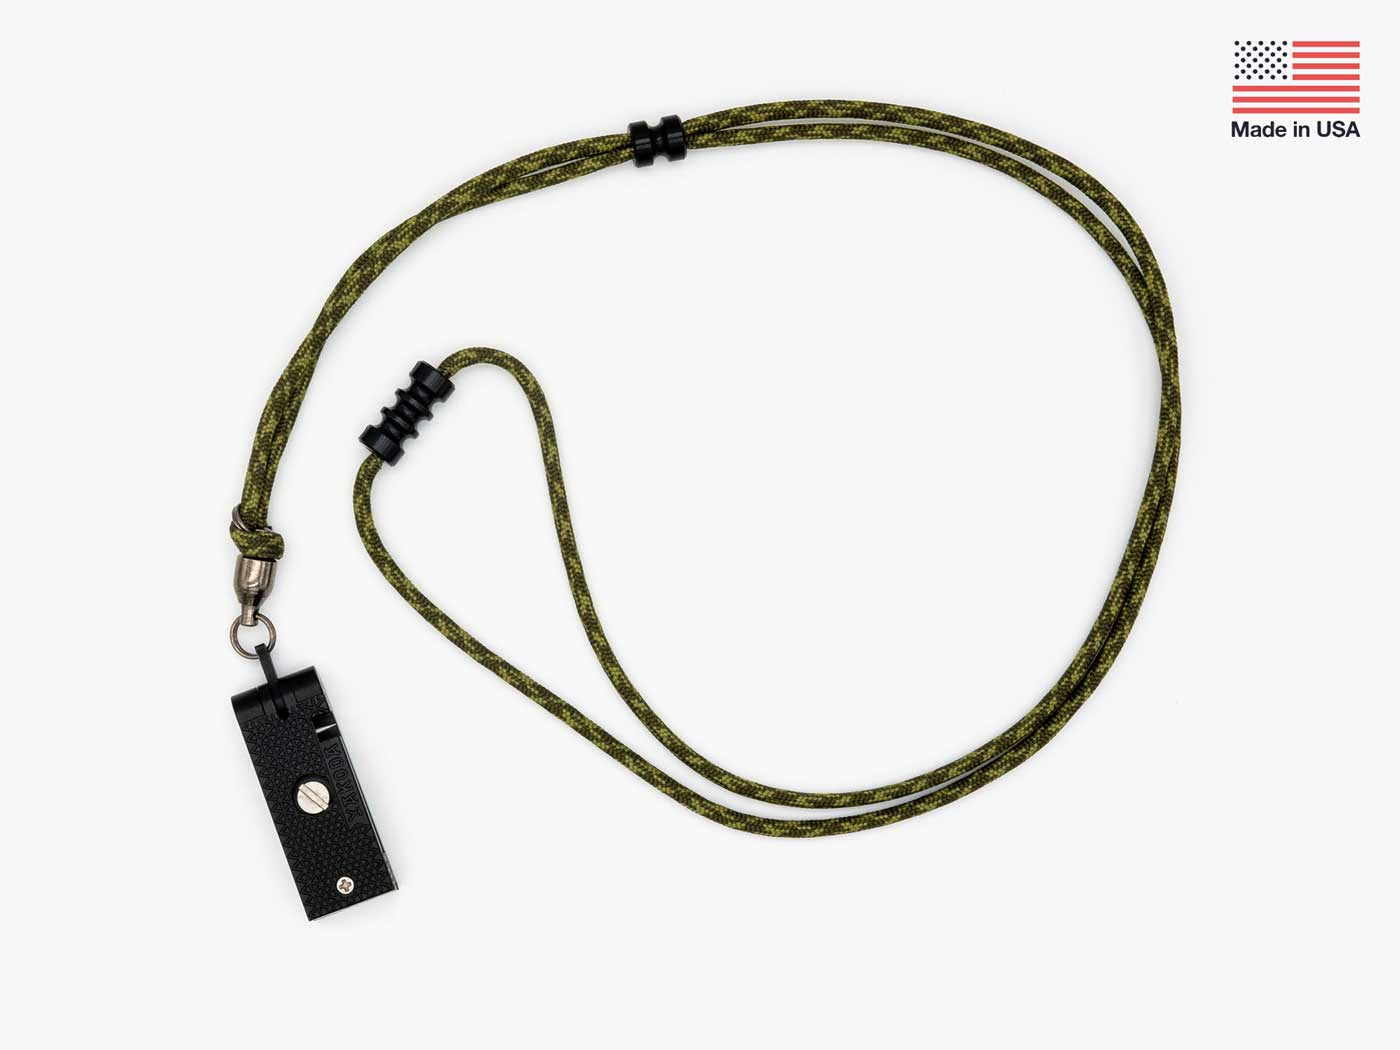 Fly Fishing Lanyard- Simple and Reliable Lanyard Are you a fisherman that  doesn't want 10 things hanging around your neck Then this is for you., Camo